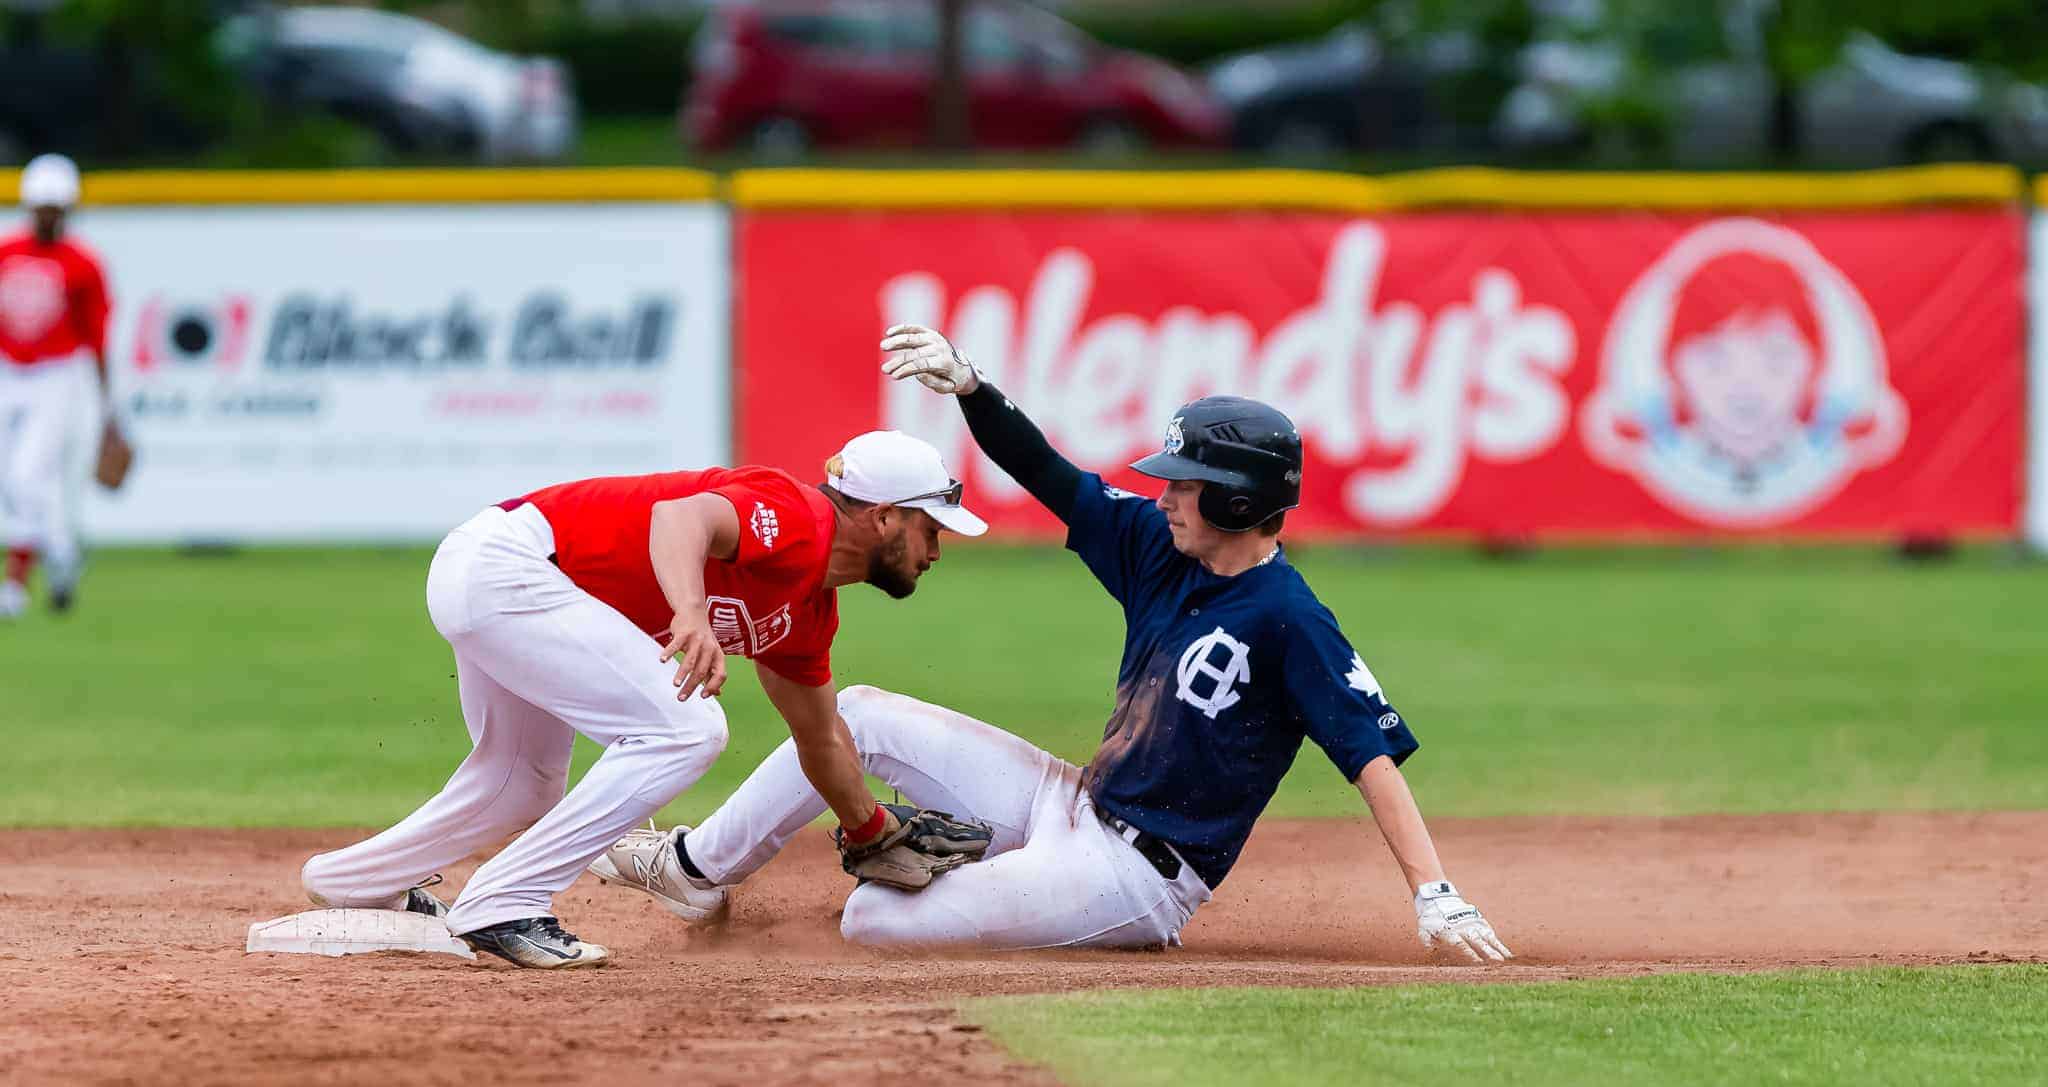 Cuba busts out the big bats, knock off HarbourCats in doubleheader nightcap